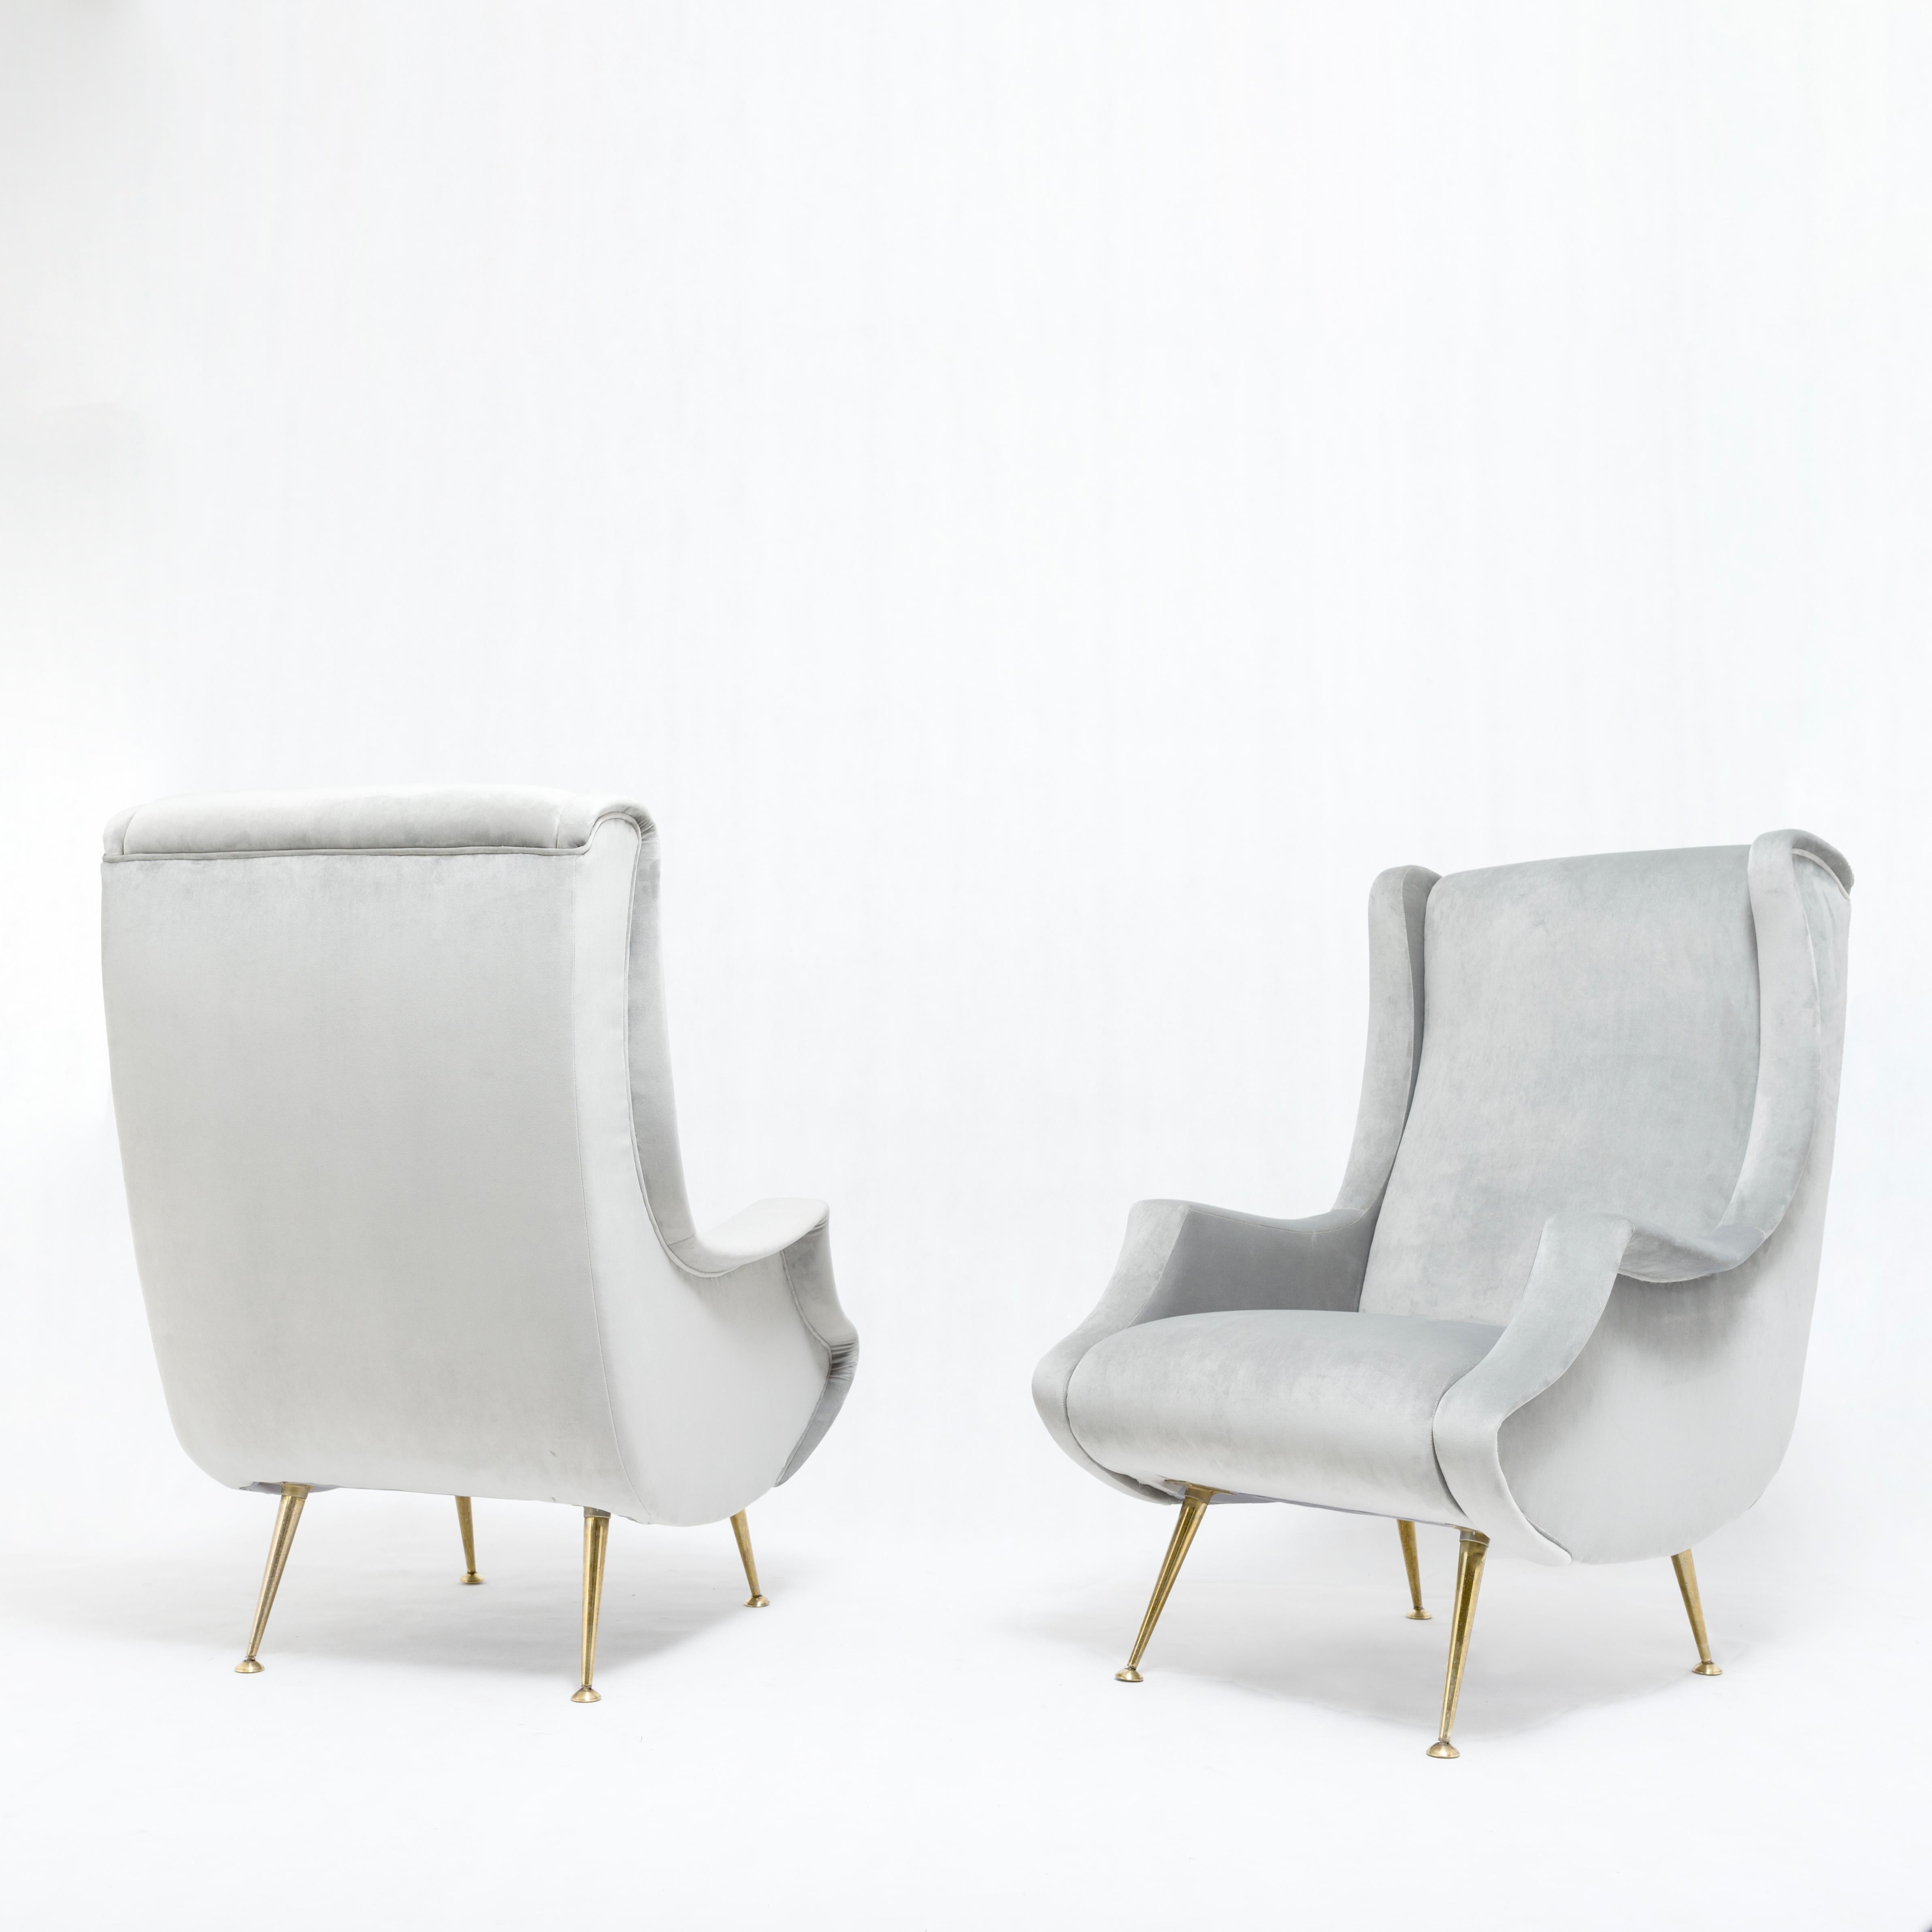 Pair of midcentury armchairs by ISA Bergamo
Italy, 1950s

Reupholstered in grey velvet

ISA Bergamo was the furniture company which produced many of Gio Ponti best-known designs.